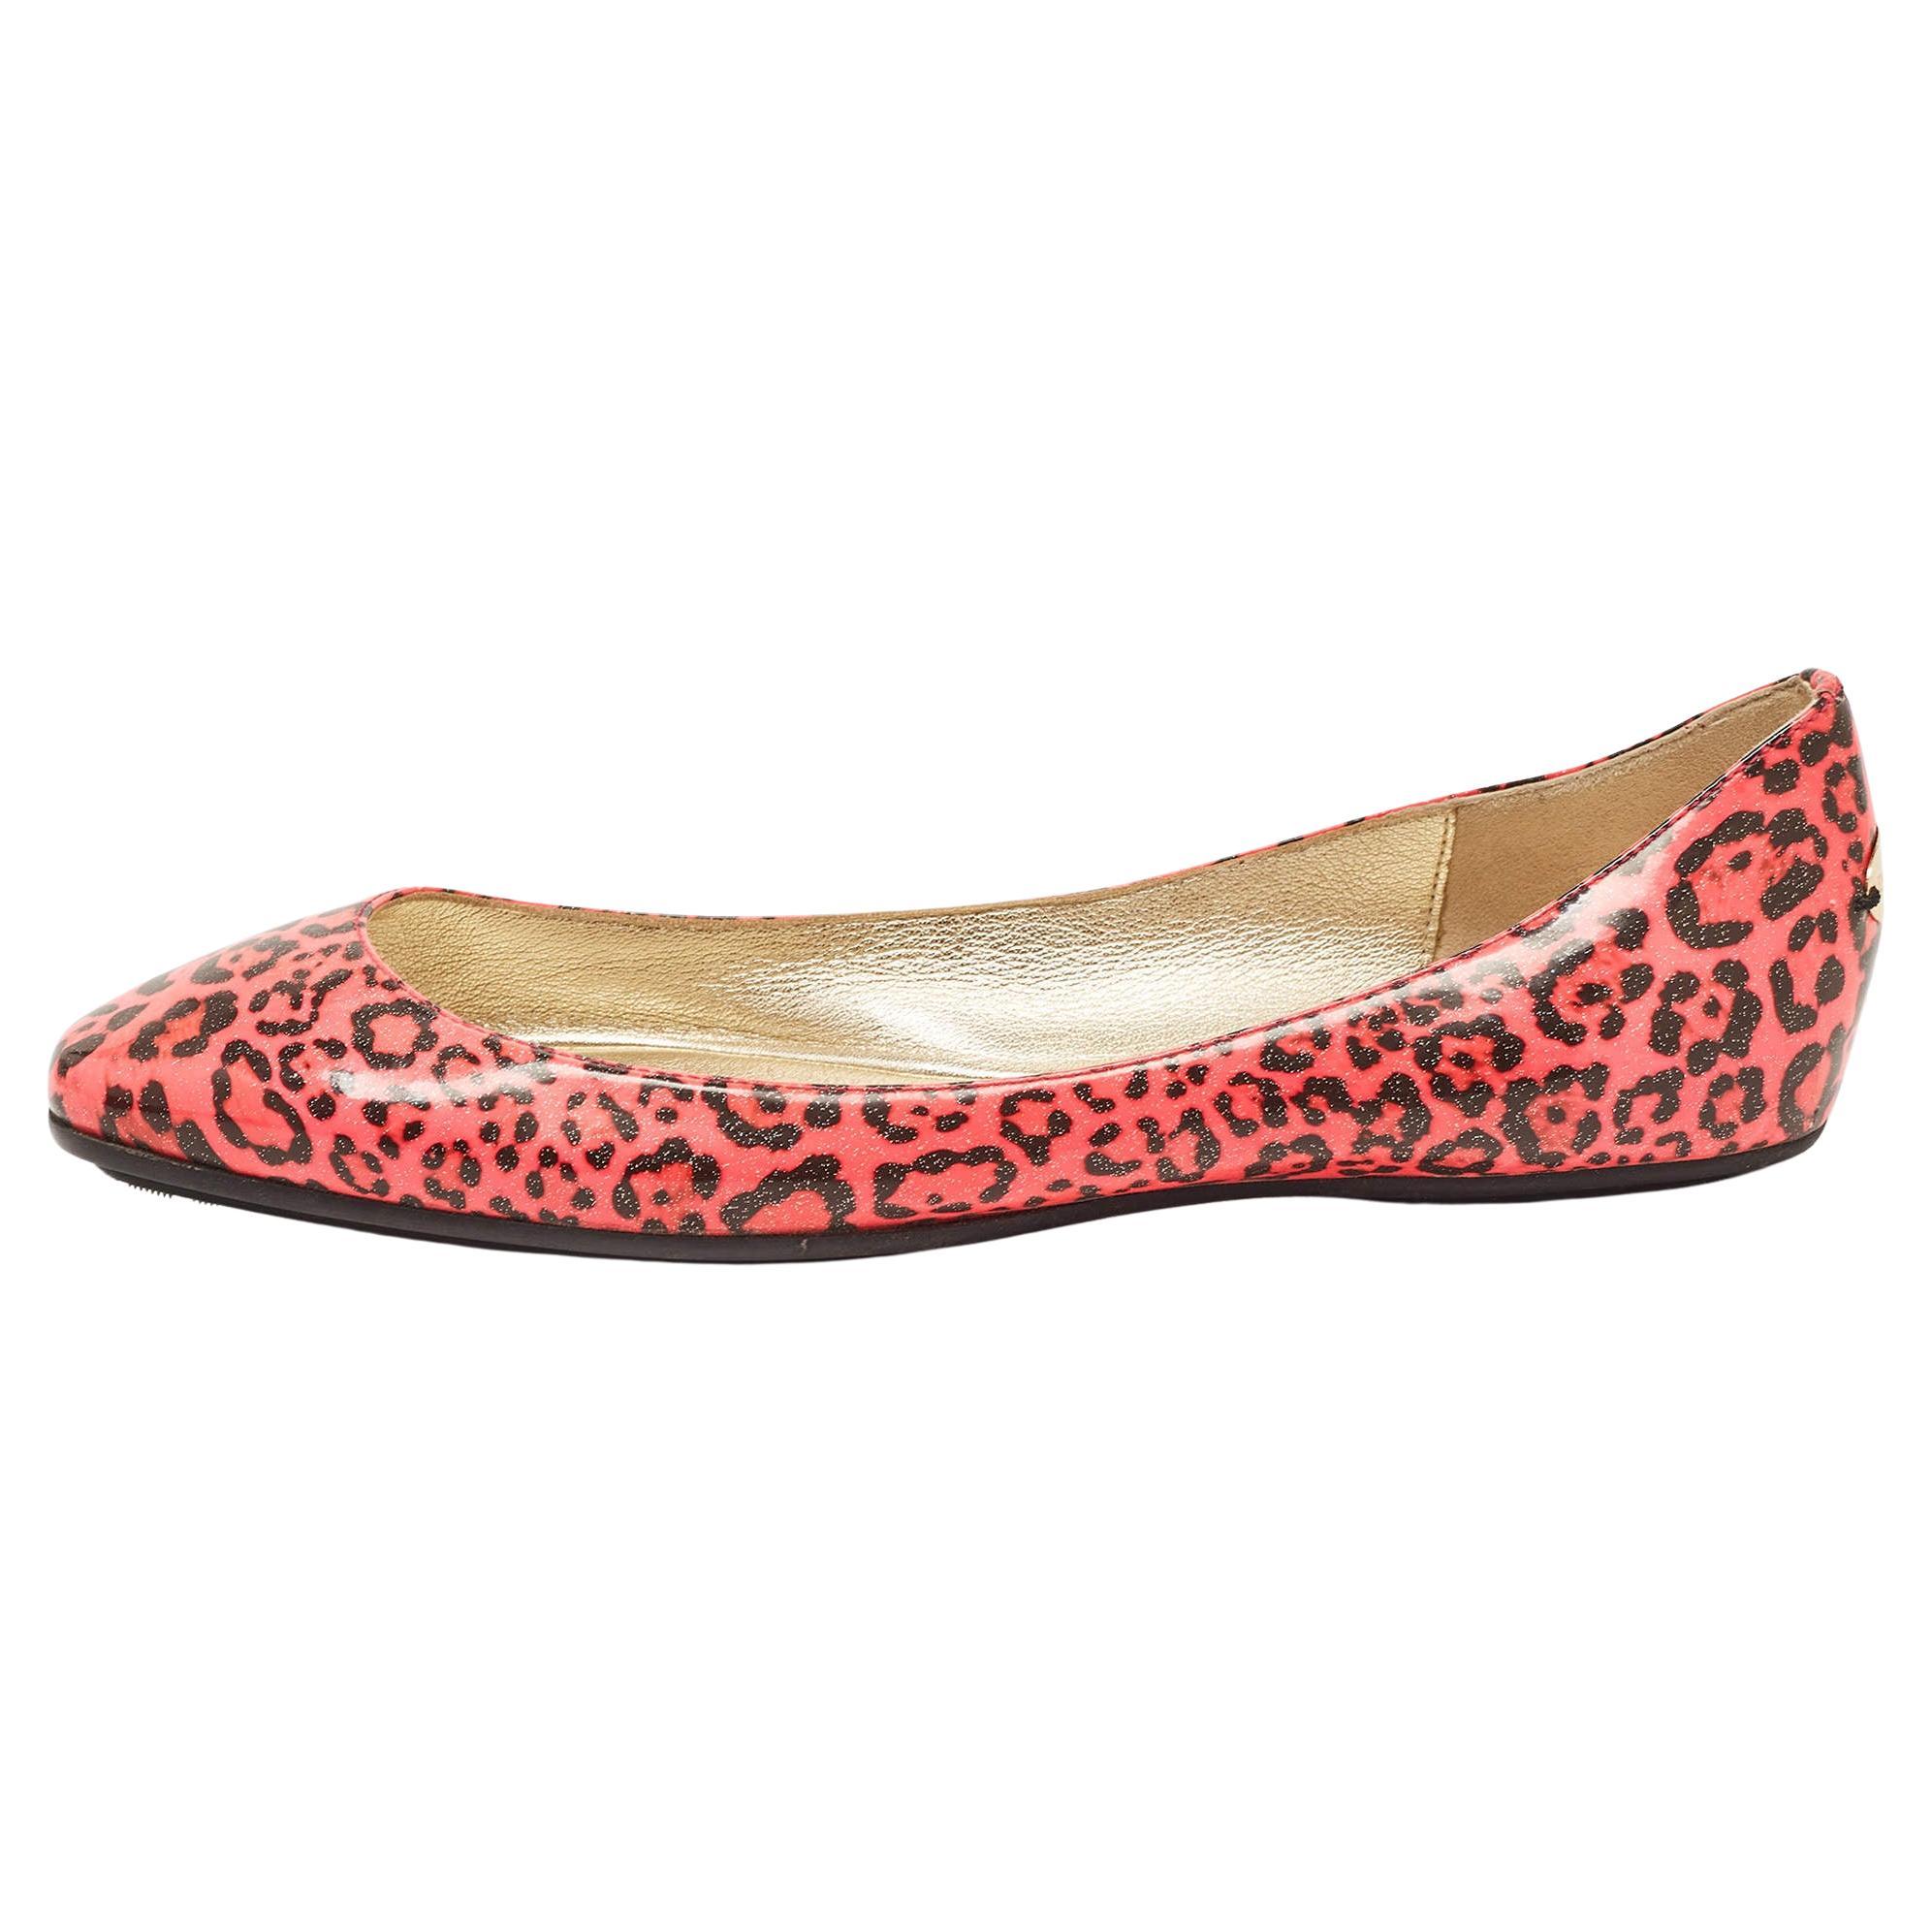 Jimmy Choo Pink/Black Leopard Print Patent Leather Ballet Flats Size 37 For Sale